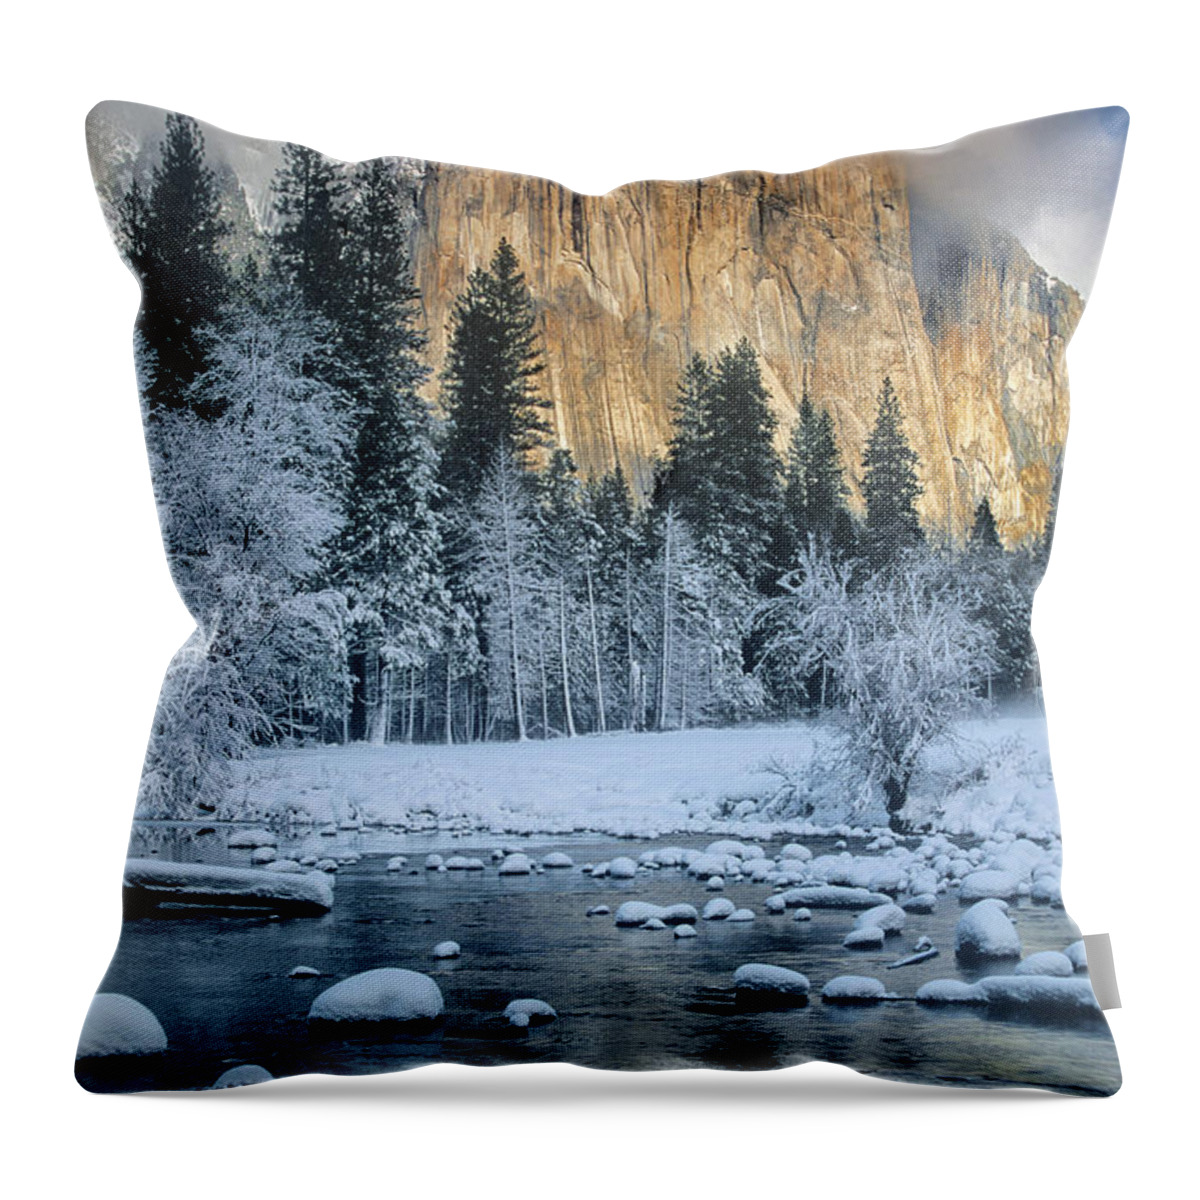 Dave Welling Throw Pillow featuring the photograph El Capitan Winter Yosemite National Park California by Dave Welling